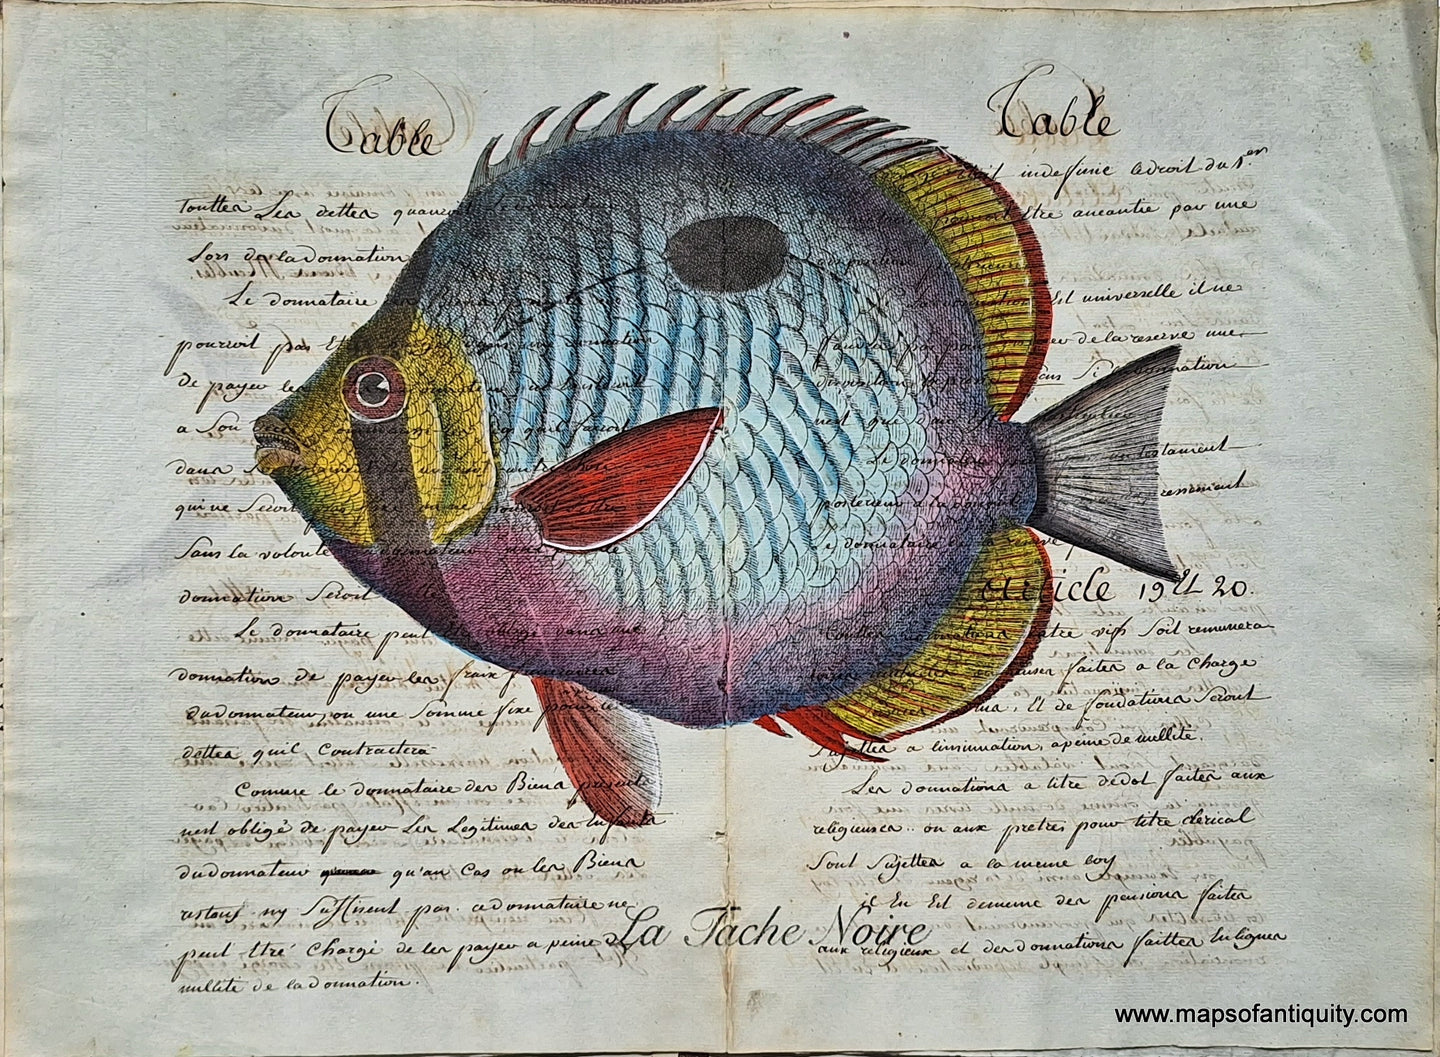 Colorful engraving of a fish with a black spot on its side and a black stripe near its eye. Yellow, red, blue, and purple-pink. Digitally-Engraved-Specialty-Reproduction-La-Tache-Noire-(Reproduction-on-Antique-Paper)-Digitally-Engraved-Specialty-Reproduction---Reproduction-Maps-Of-Antiquity